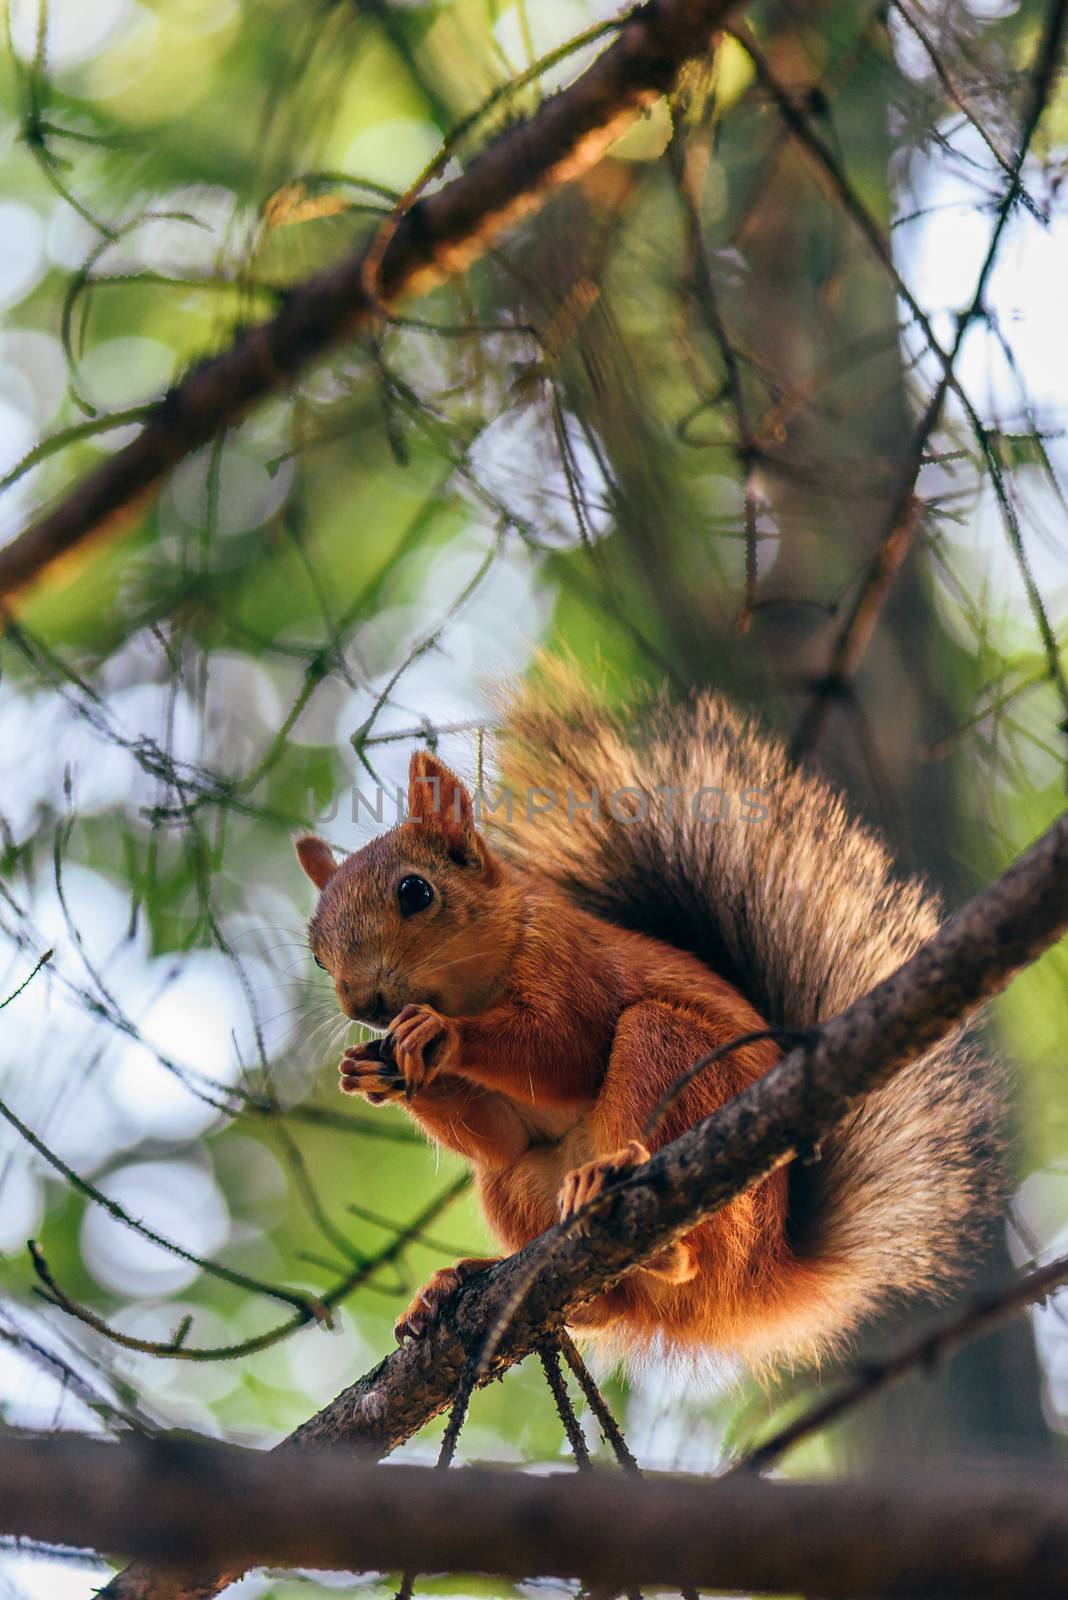 Red squirrel eats nuts and sits on branch in a fir forest.